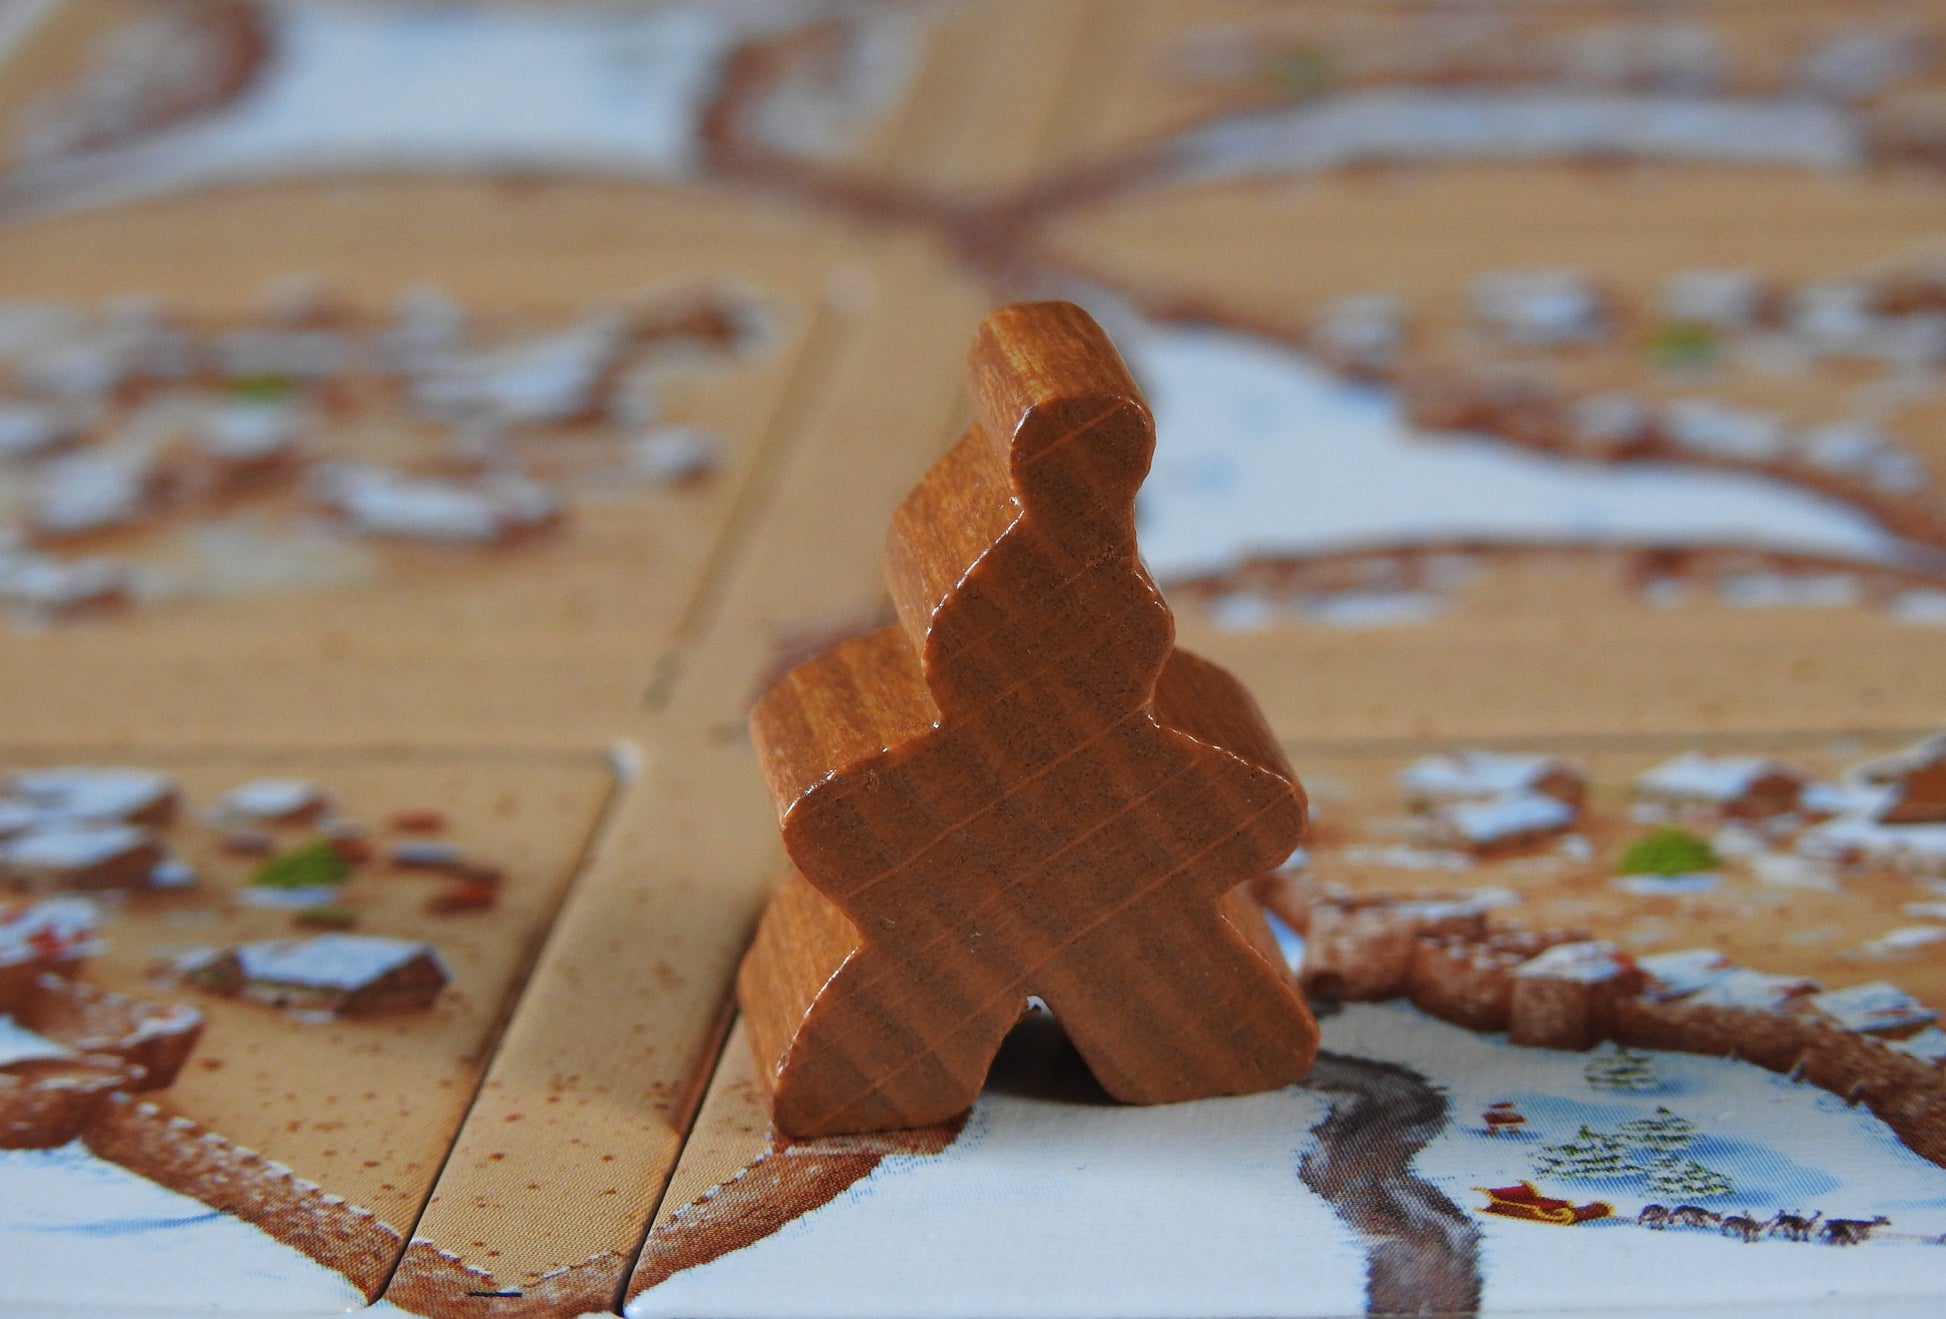 Close-up view of the gingerbread man meeple - tasty!